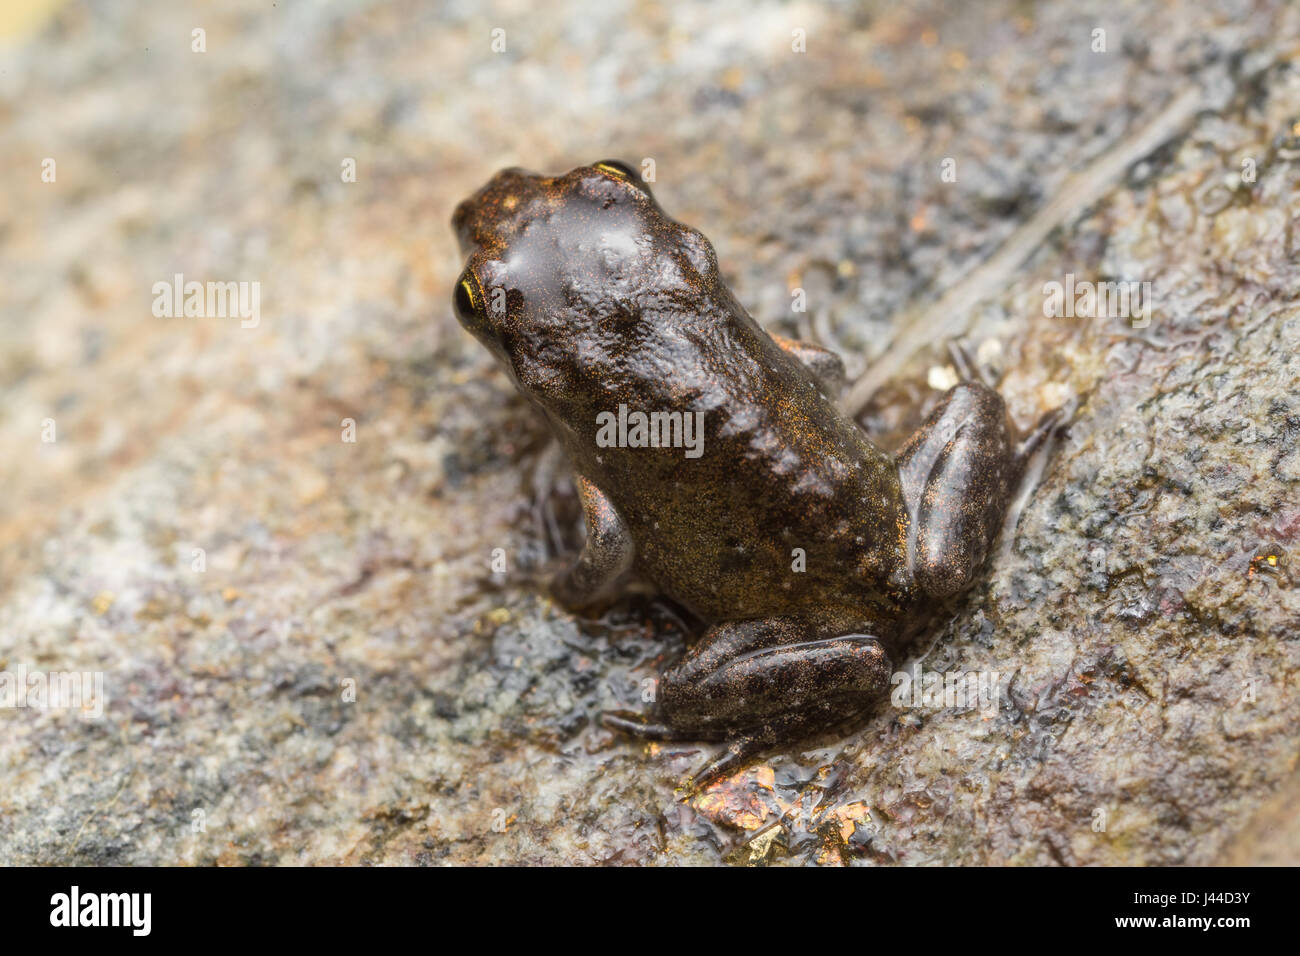 A tiny frog, 1cm in size, from recent metamorphosis, a few days, from tadpole to frog Stock Photo